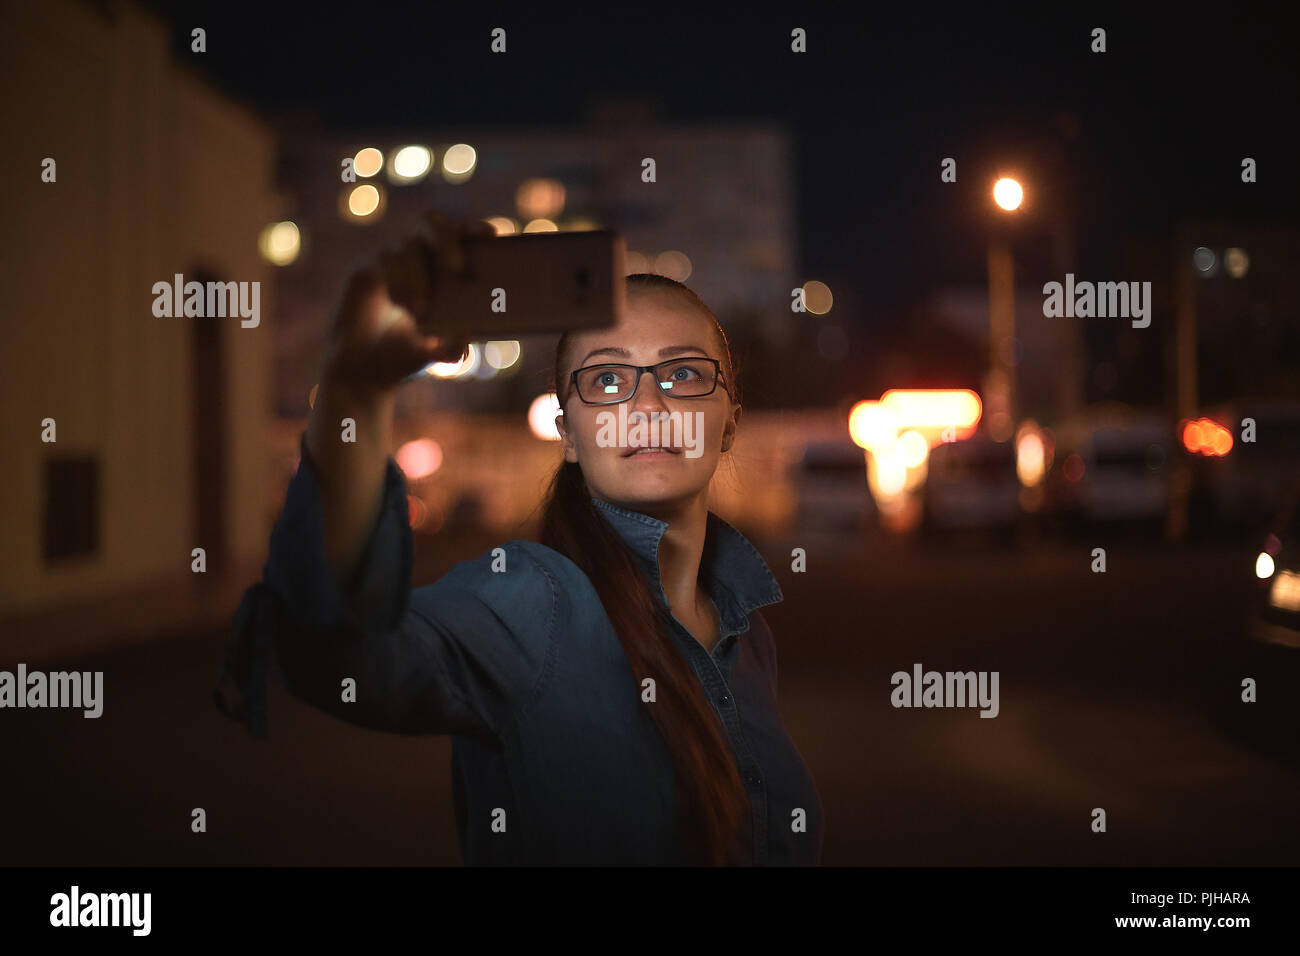 Portrait of young beautiful caucasian woman using smart phone hand hold outdoor in the city night, smiling, face illuminated screenlight - social network, technology, comunication concept Stock Photo